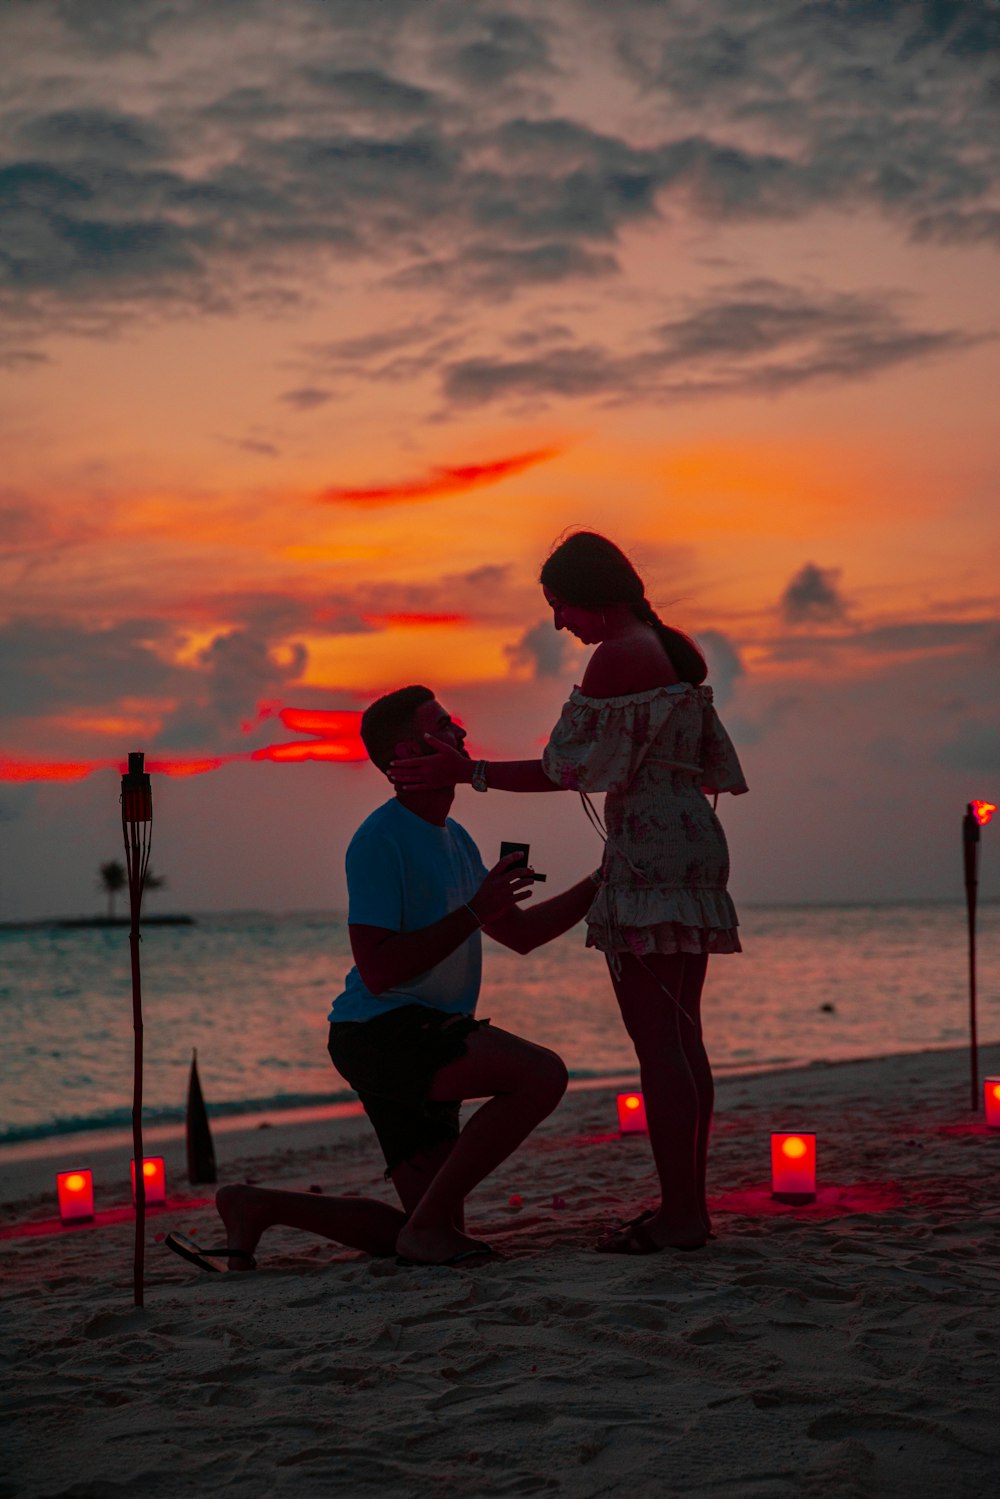 man kneeling in front of a woman by the beach during golden hour